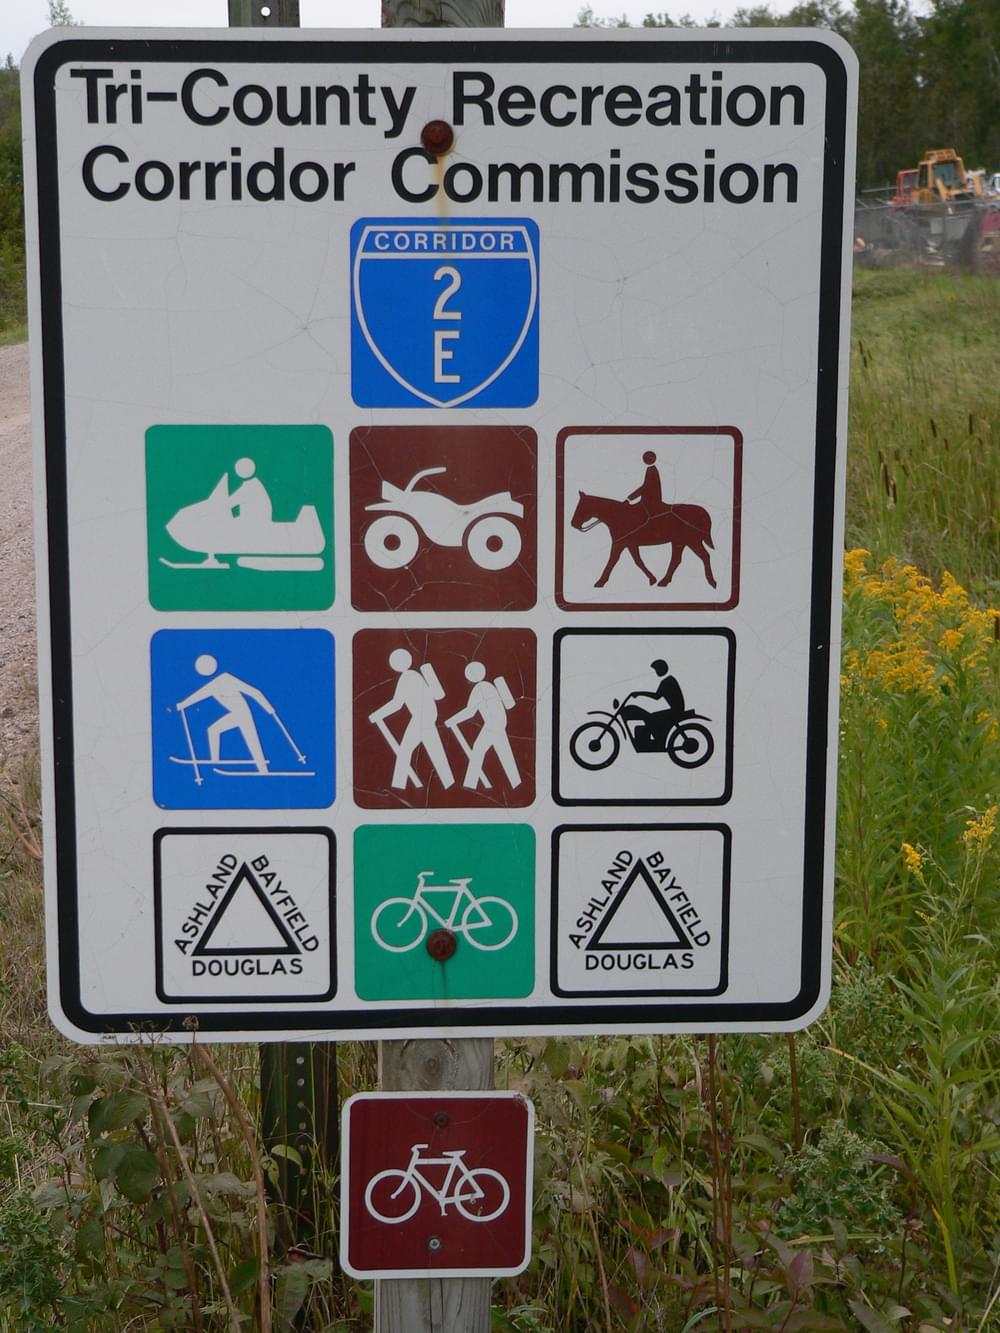 Both motorized and nonmotorized trail activities are allowed on this Ashland, Wisconsin trail. Trail is used for both winter and summer activities.